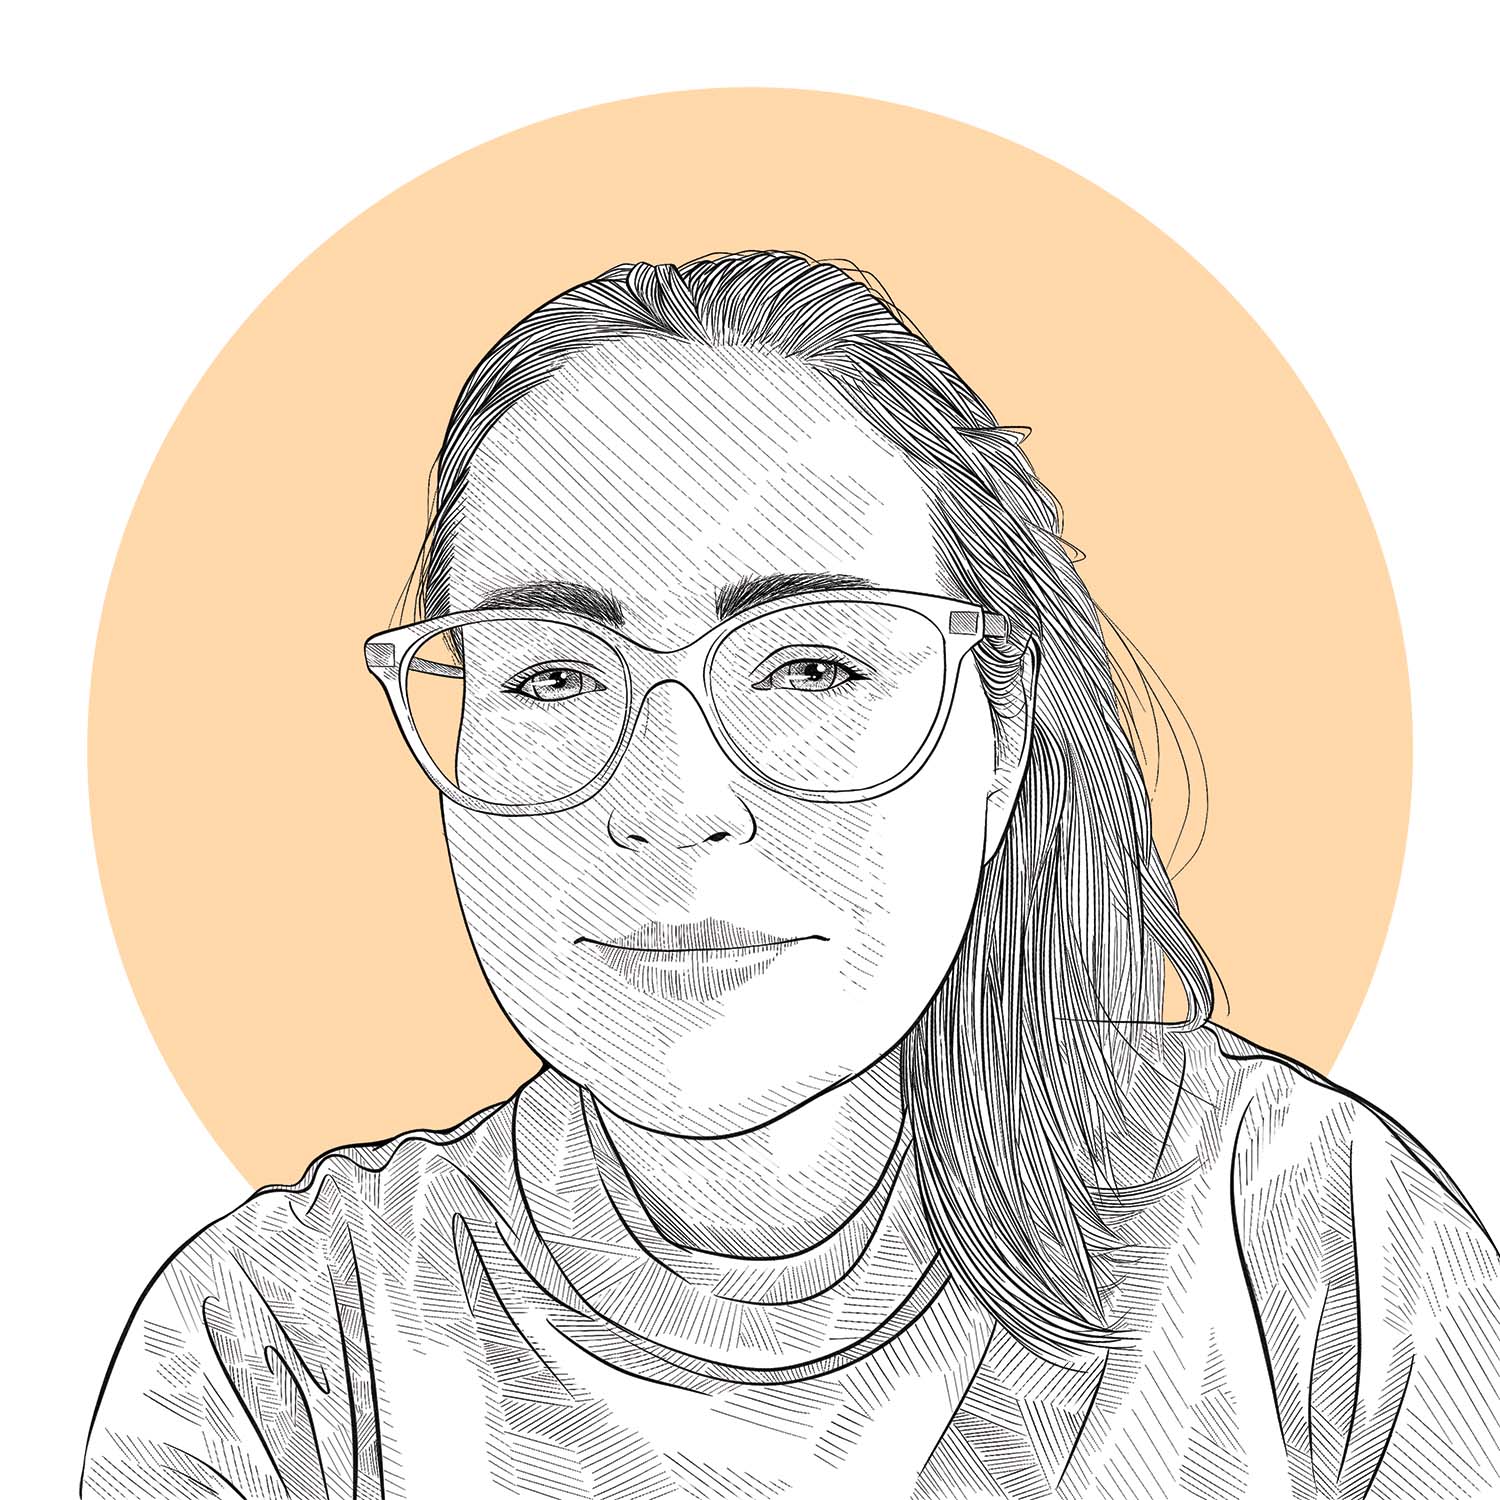 BBlack and white illustration of a woman with glasses and a ponytail slightly smiling.